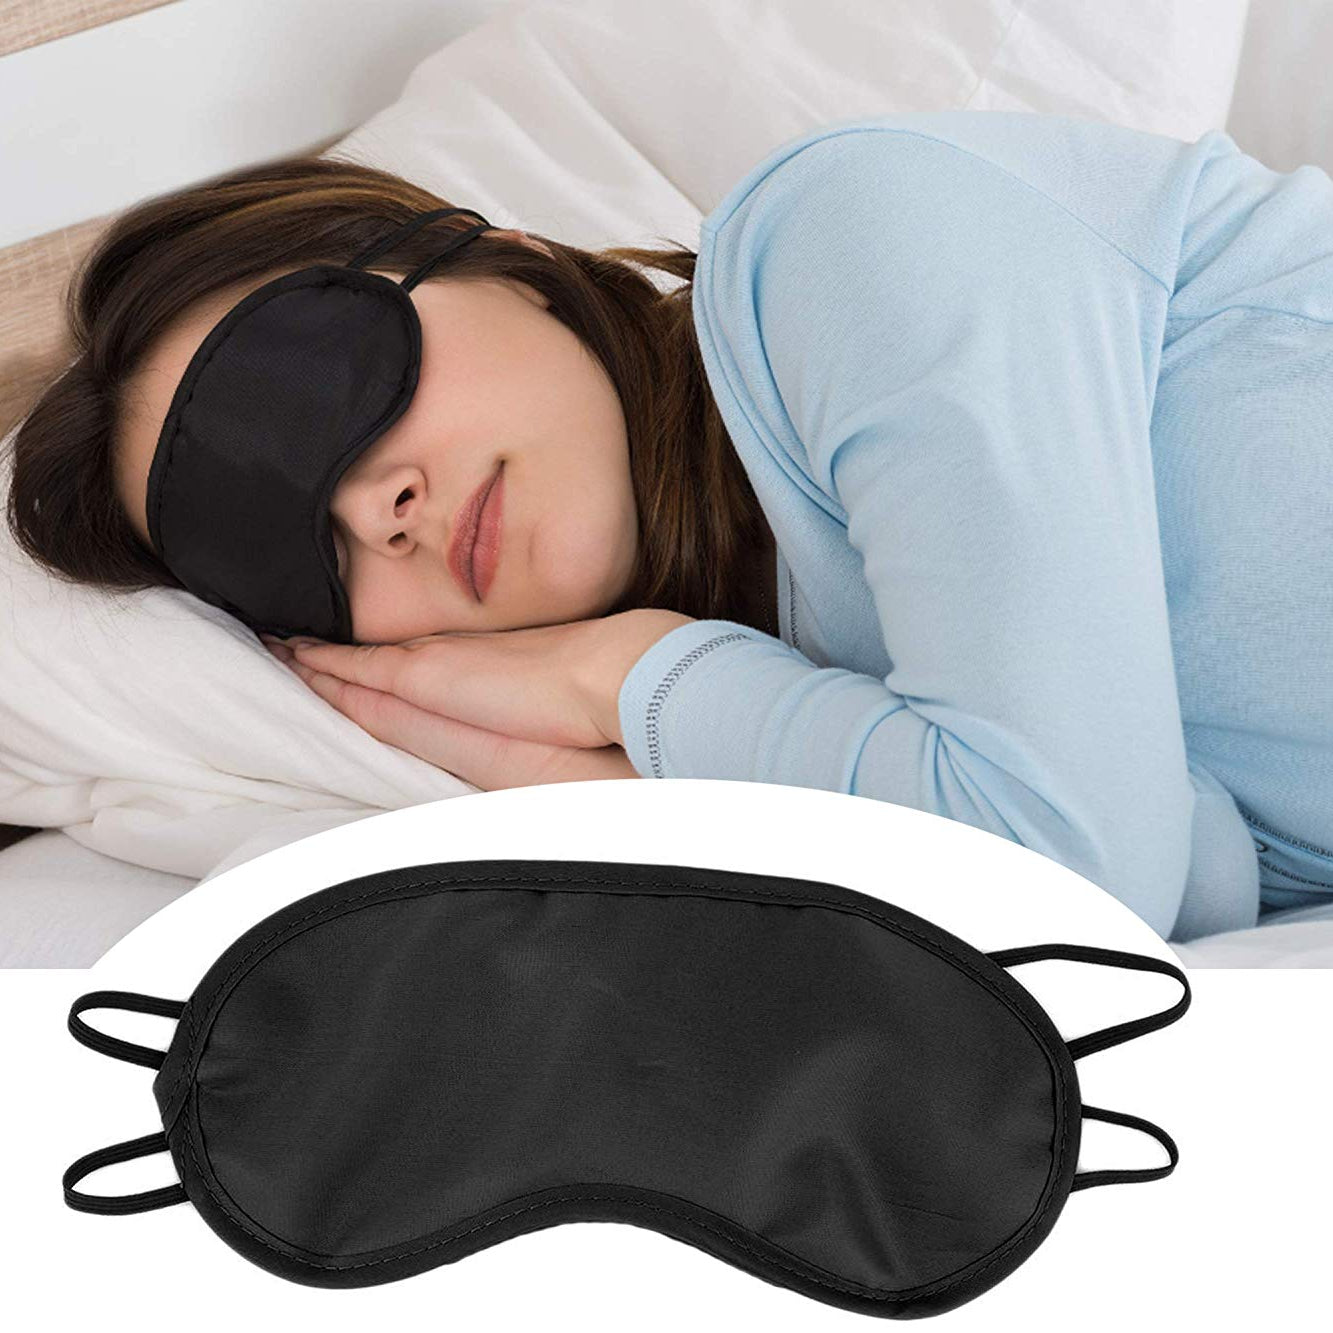 Buy 1 Get 2 Free Ultimate Relaxation Sleep Eye Mask Cover For Travel (3 Pcs)